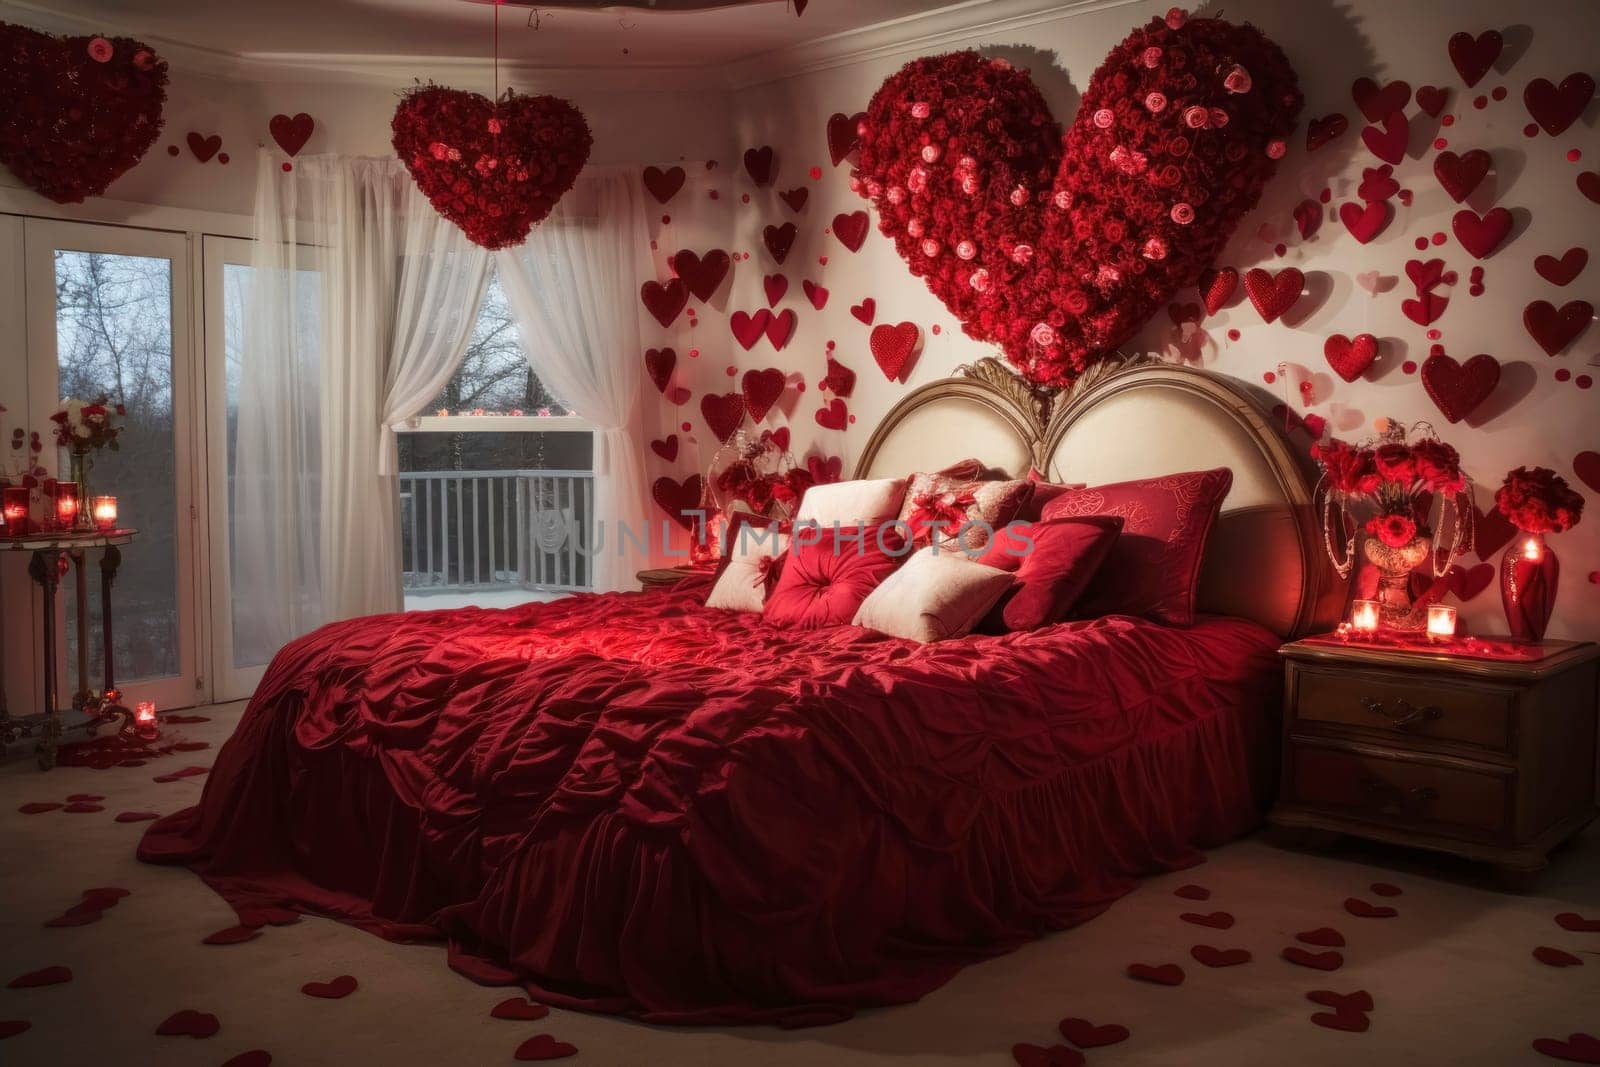 Romantic bedroom setting elaborately decorated with red heart-shaped balloons, flower arrangements, and candles for Valentine's Day.